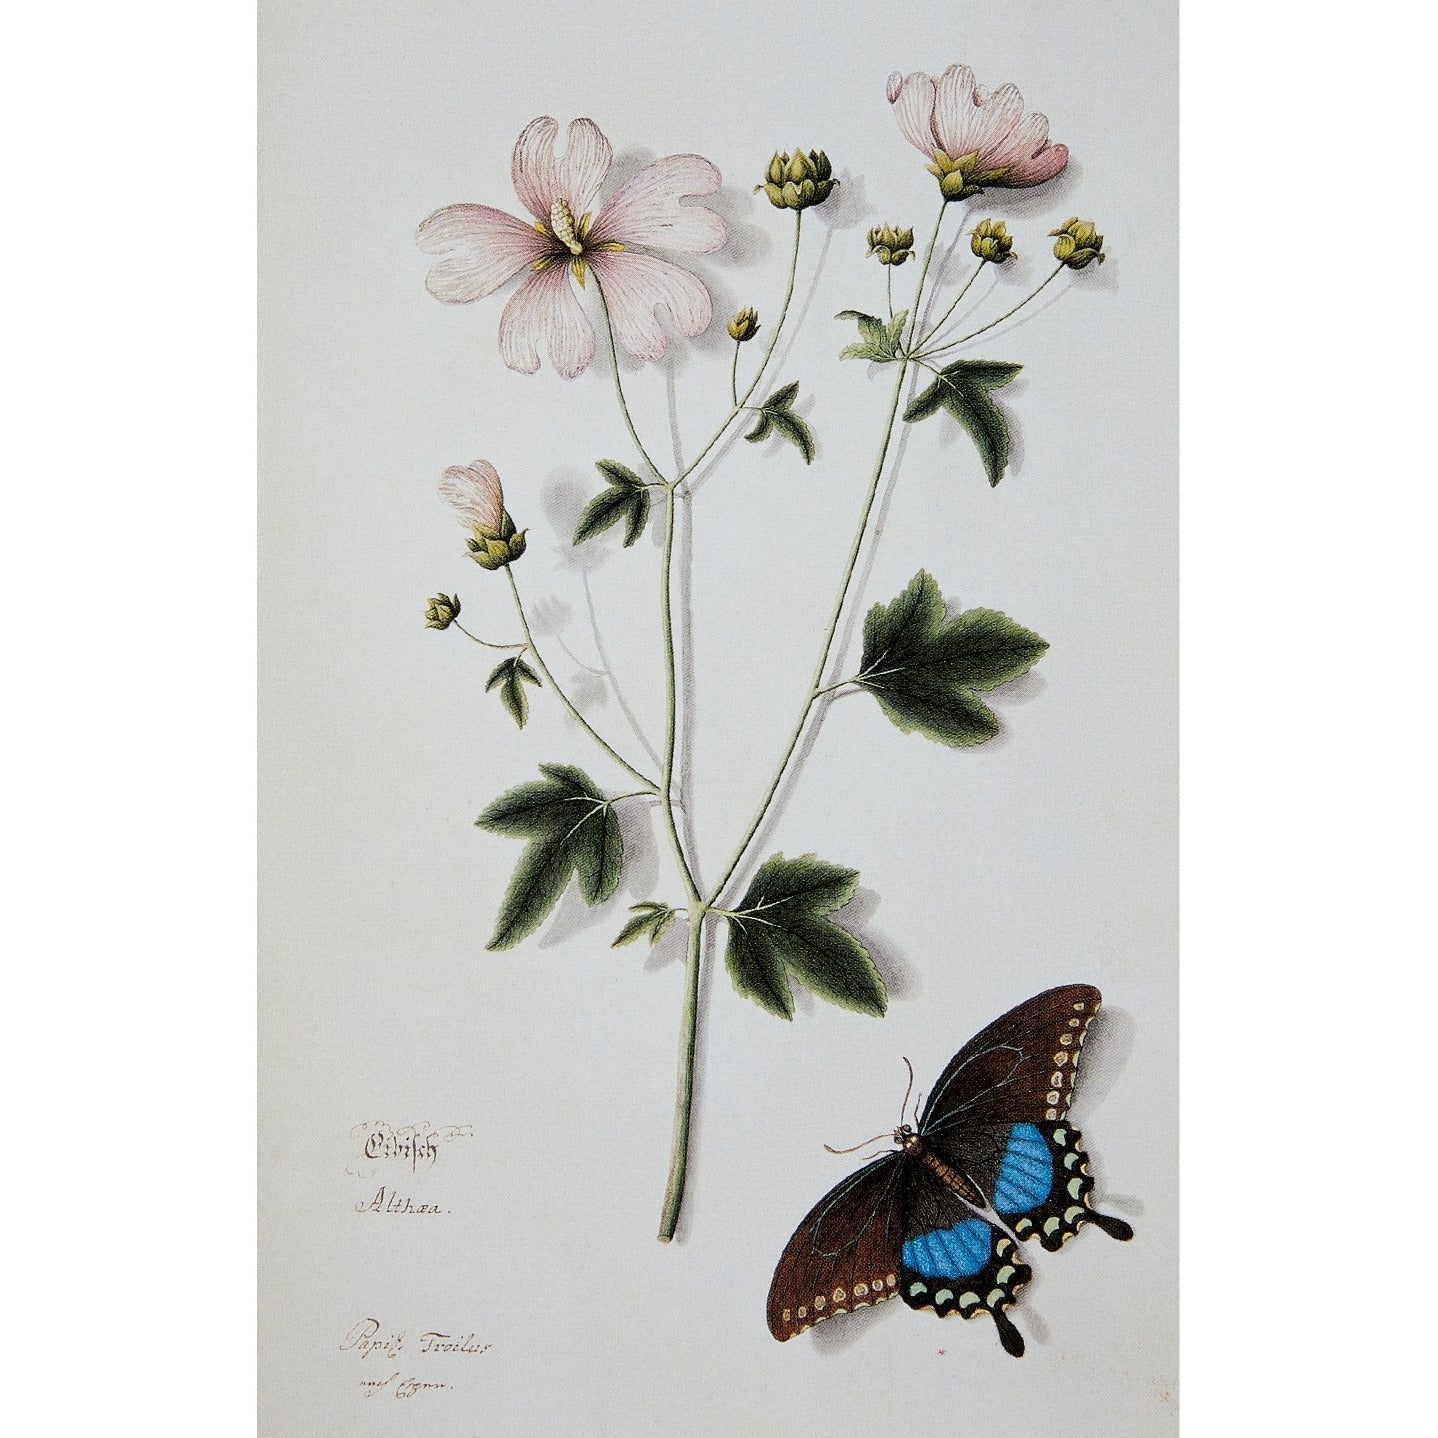 Notecard image - Joseph Jakob von Plenck, Marsh-mallow and Spicebush Swallowtail butterfly. From the Broughton collection in the Fitzwilliam Museum, brought to you by CuratingCambridge.co.uk